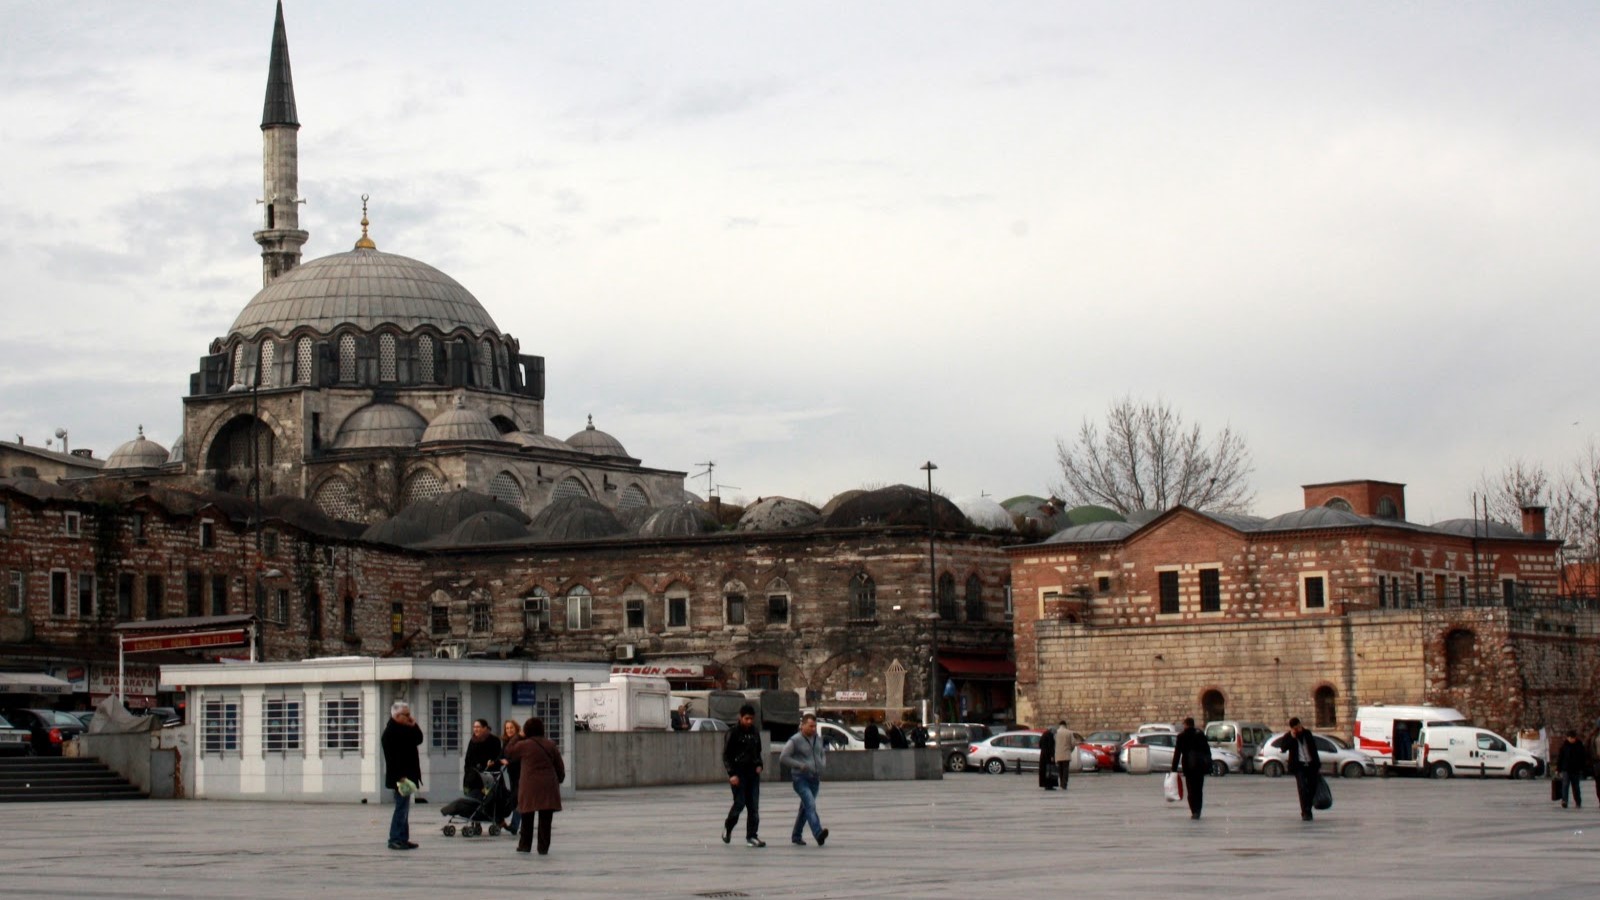 The Rustem Pasha Mosque: A Jewel of Ottoman Architecture in Istanbul